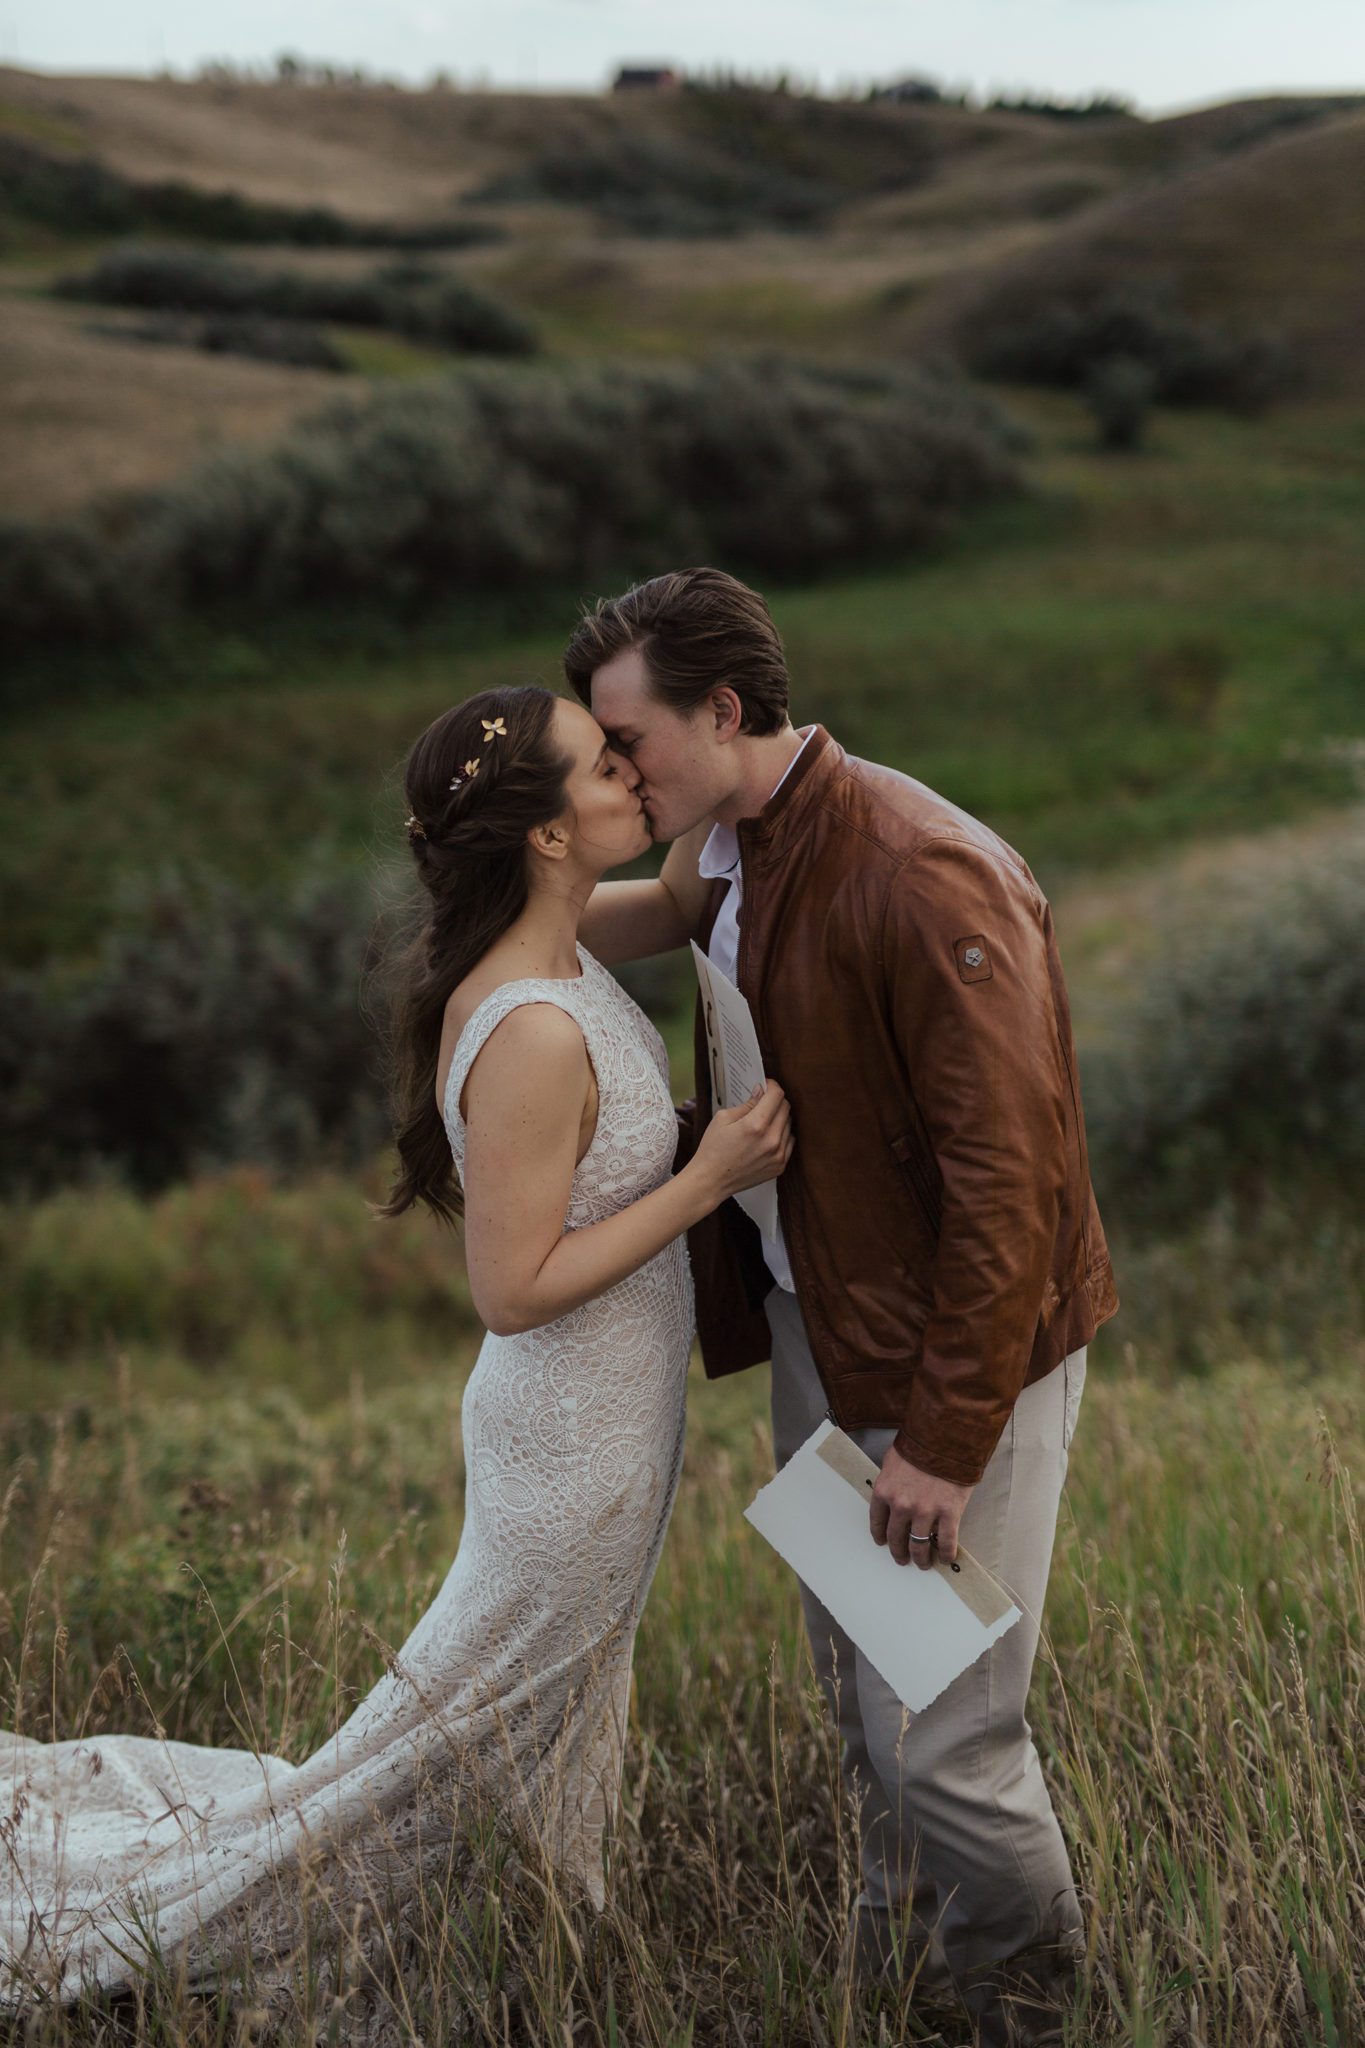 Bride and groom share a kiss after reading their vows to each other in a rural Alberta countryside, fall vow renewal inspiration, bride wearing lace-detailed gown.